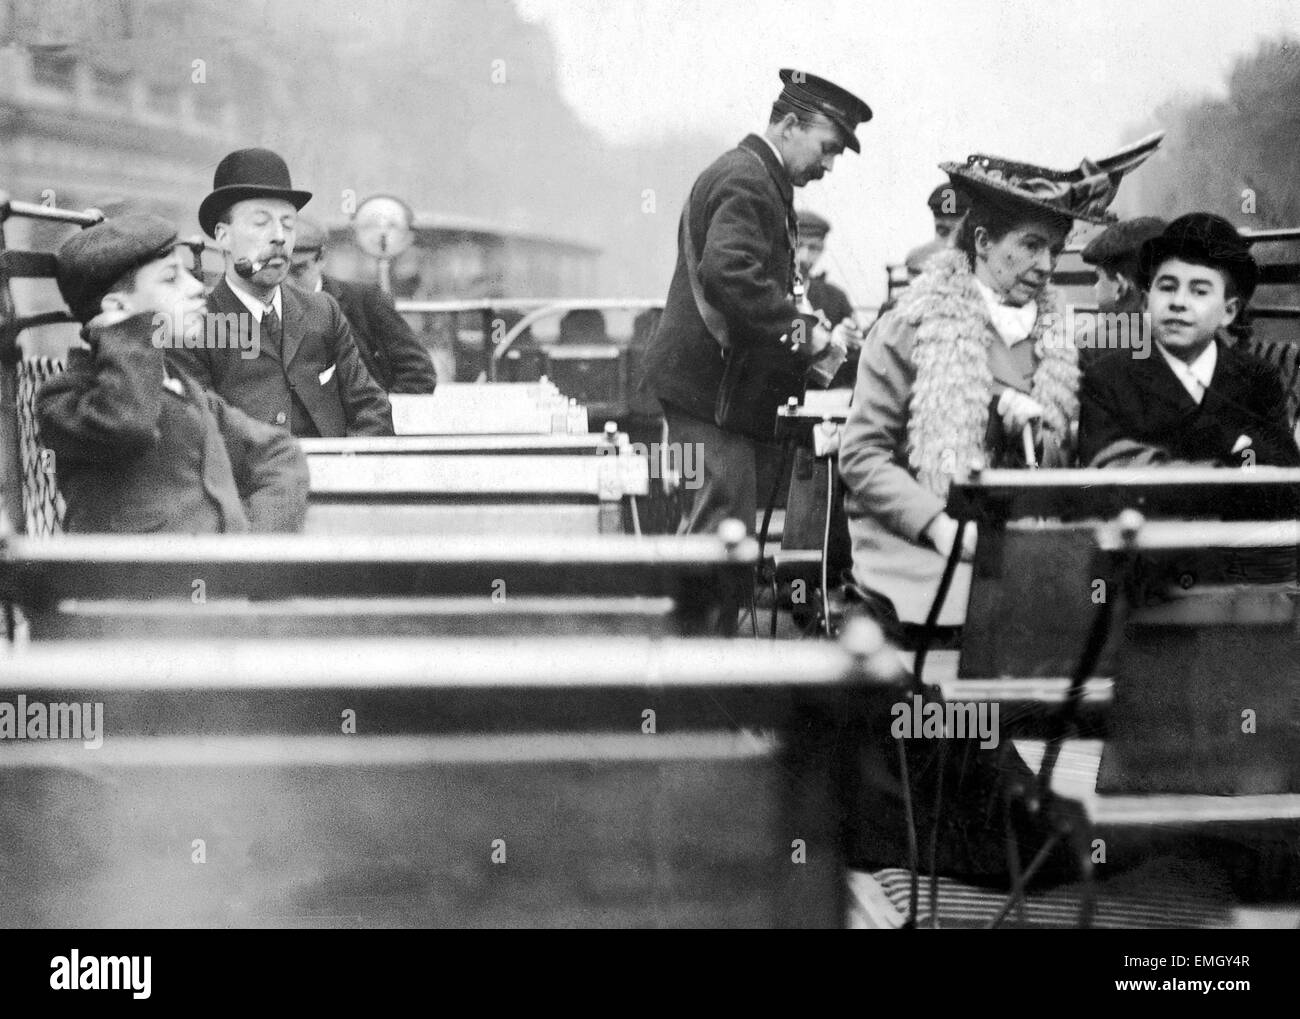 A conductor checks for passengers tickets on the open top deck of a London tram. These tickets were used as part of a Daily Mirror promtion with a prize awarded to a winning ticket number. 22nd May 1906. Stock Photo